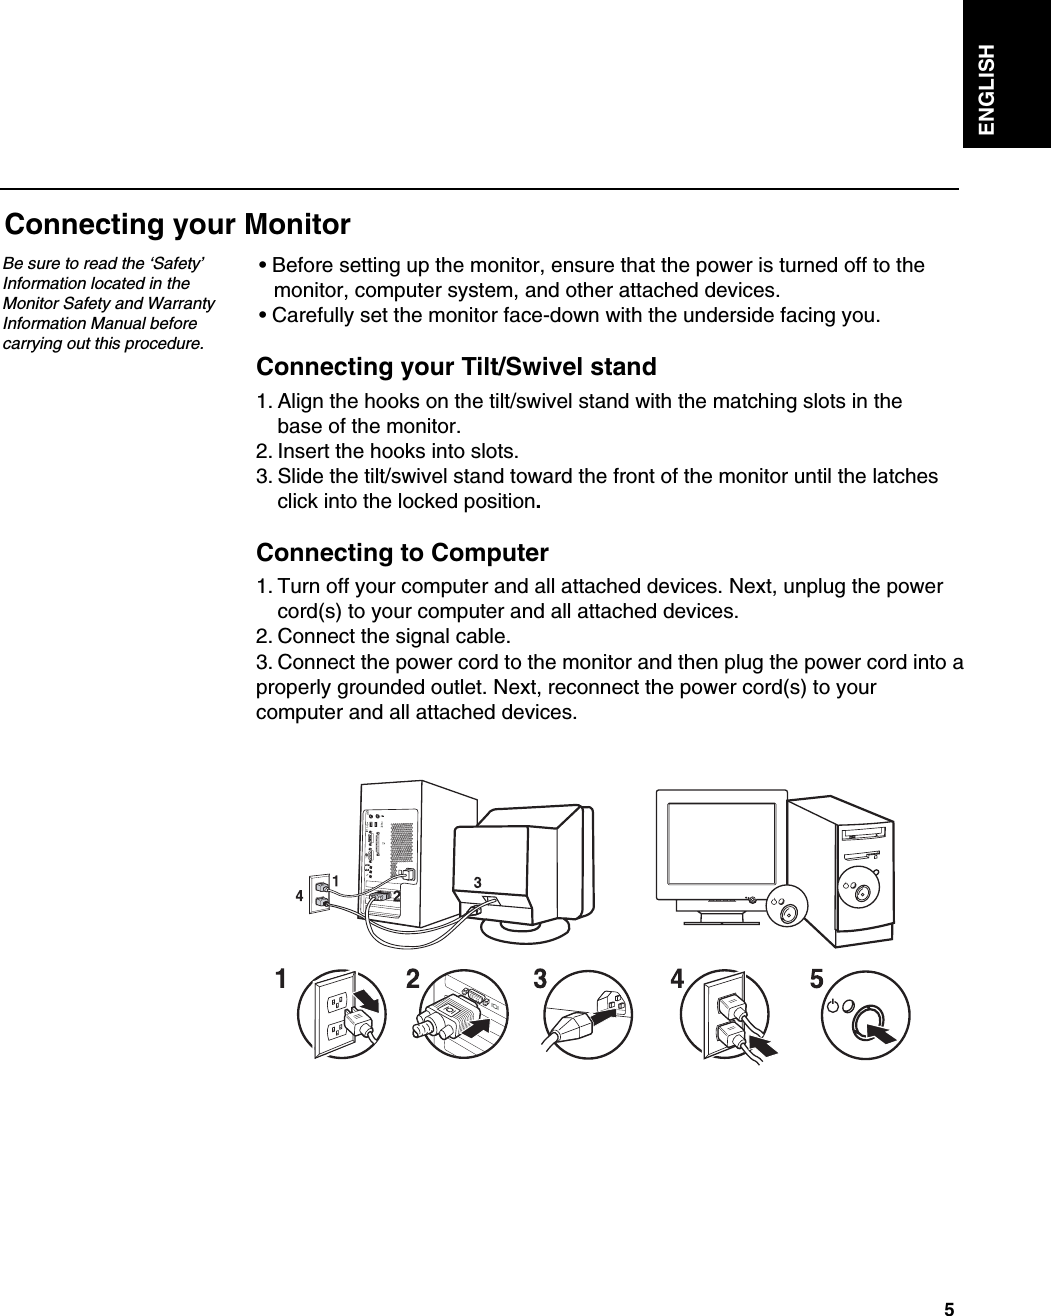 5ENGLISHConnecting your MonitorBe sure to read the ‘Safety’Information located in theMonitor Safety and WarrantyInformation Manual beforecarrying out this procedure.• Before setting up the monitor, ensure that the power is turned off to the monitor, computer system, and other attached devices. • Carefully set the monitor face-down with the underside facing you.Connecting your Tilt/Swivel stand1. Align the hooks on the tilt/swivel stand with the matching slots in thebase of the monitor.2. Insert the hooks into slots.3. Slide the tilt/swivel stand toward the front of the monitor until the latches click into the locked position.Connecting to Computer1. Turn off your computer and all attached devices. Next, unplug the power cord(s) to your computer and all attached devices.2. Connect the signal cable.3. Connect the power cord to the monitor and then plug the power cord into aproperly grounded outlet. Next, reconnect the power cord(s) to yourcomputer and all attached devices.